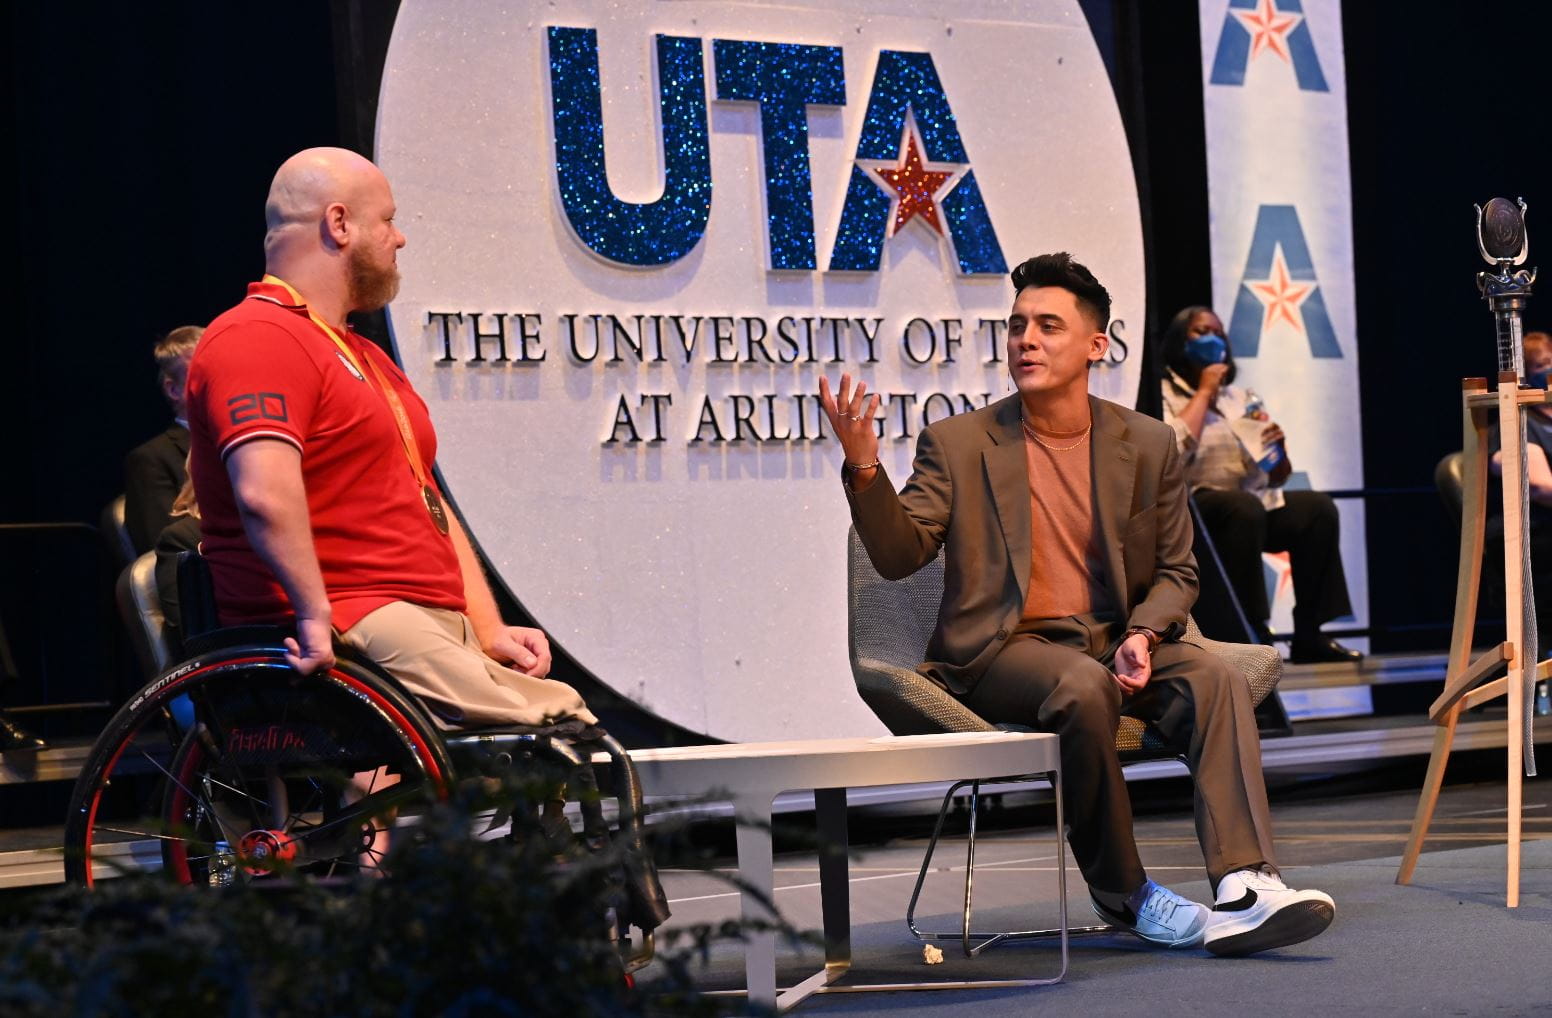 Fall 2021 Convocation Keynote speakers Aaron Gouge (’09 B.A., Kinesiology), left, a gold-medal-winning Paralympian, and Raul Solis (’12 B.A., Communication), an Emmy-winning Univision correspondent." _languageinserted="true